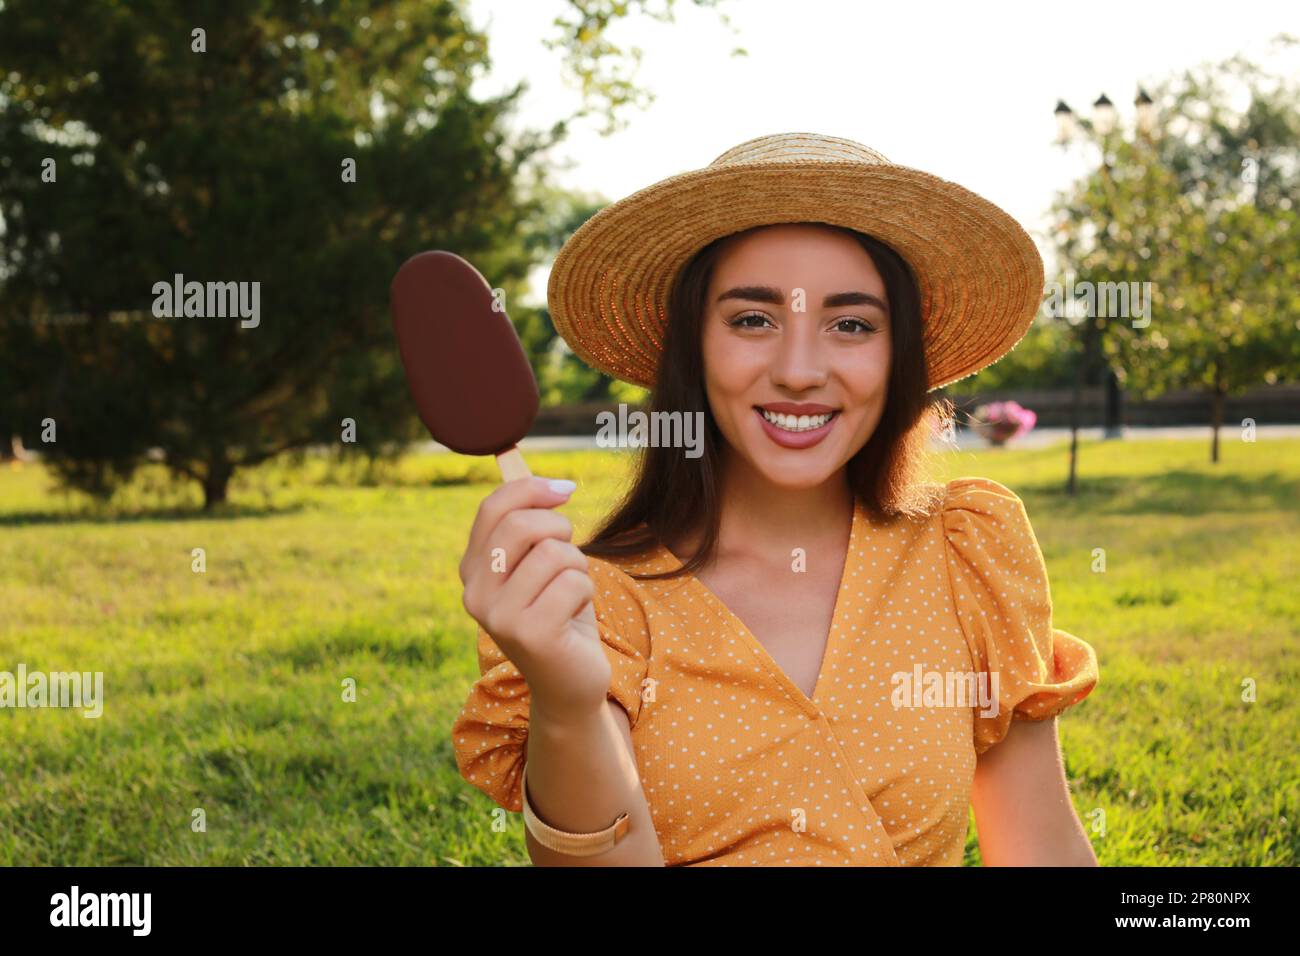 Beautiful young woman holding ice cream glazed in chocolate outdoors Stock Photo